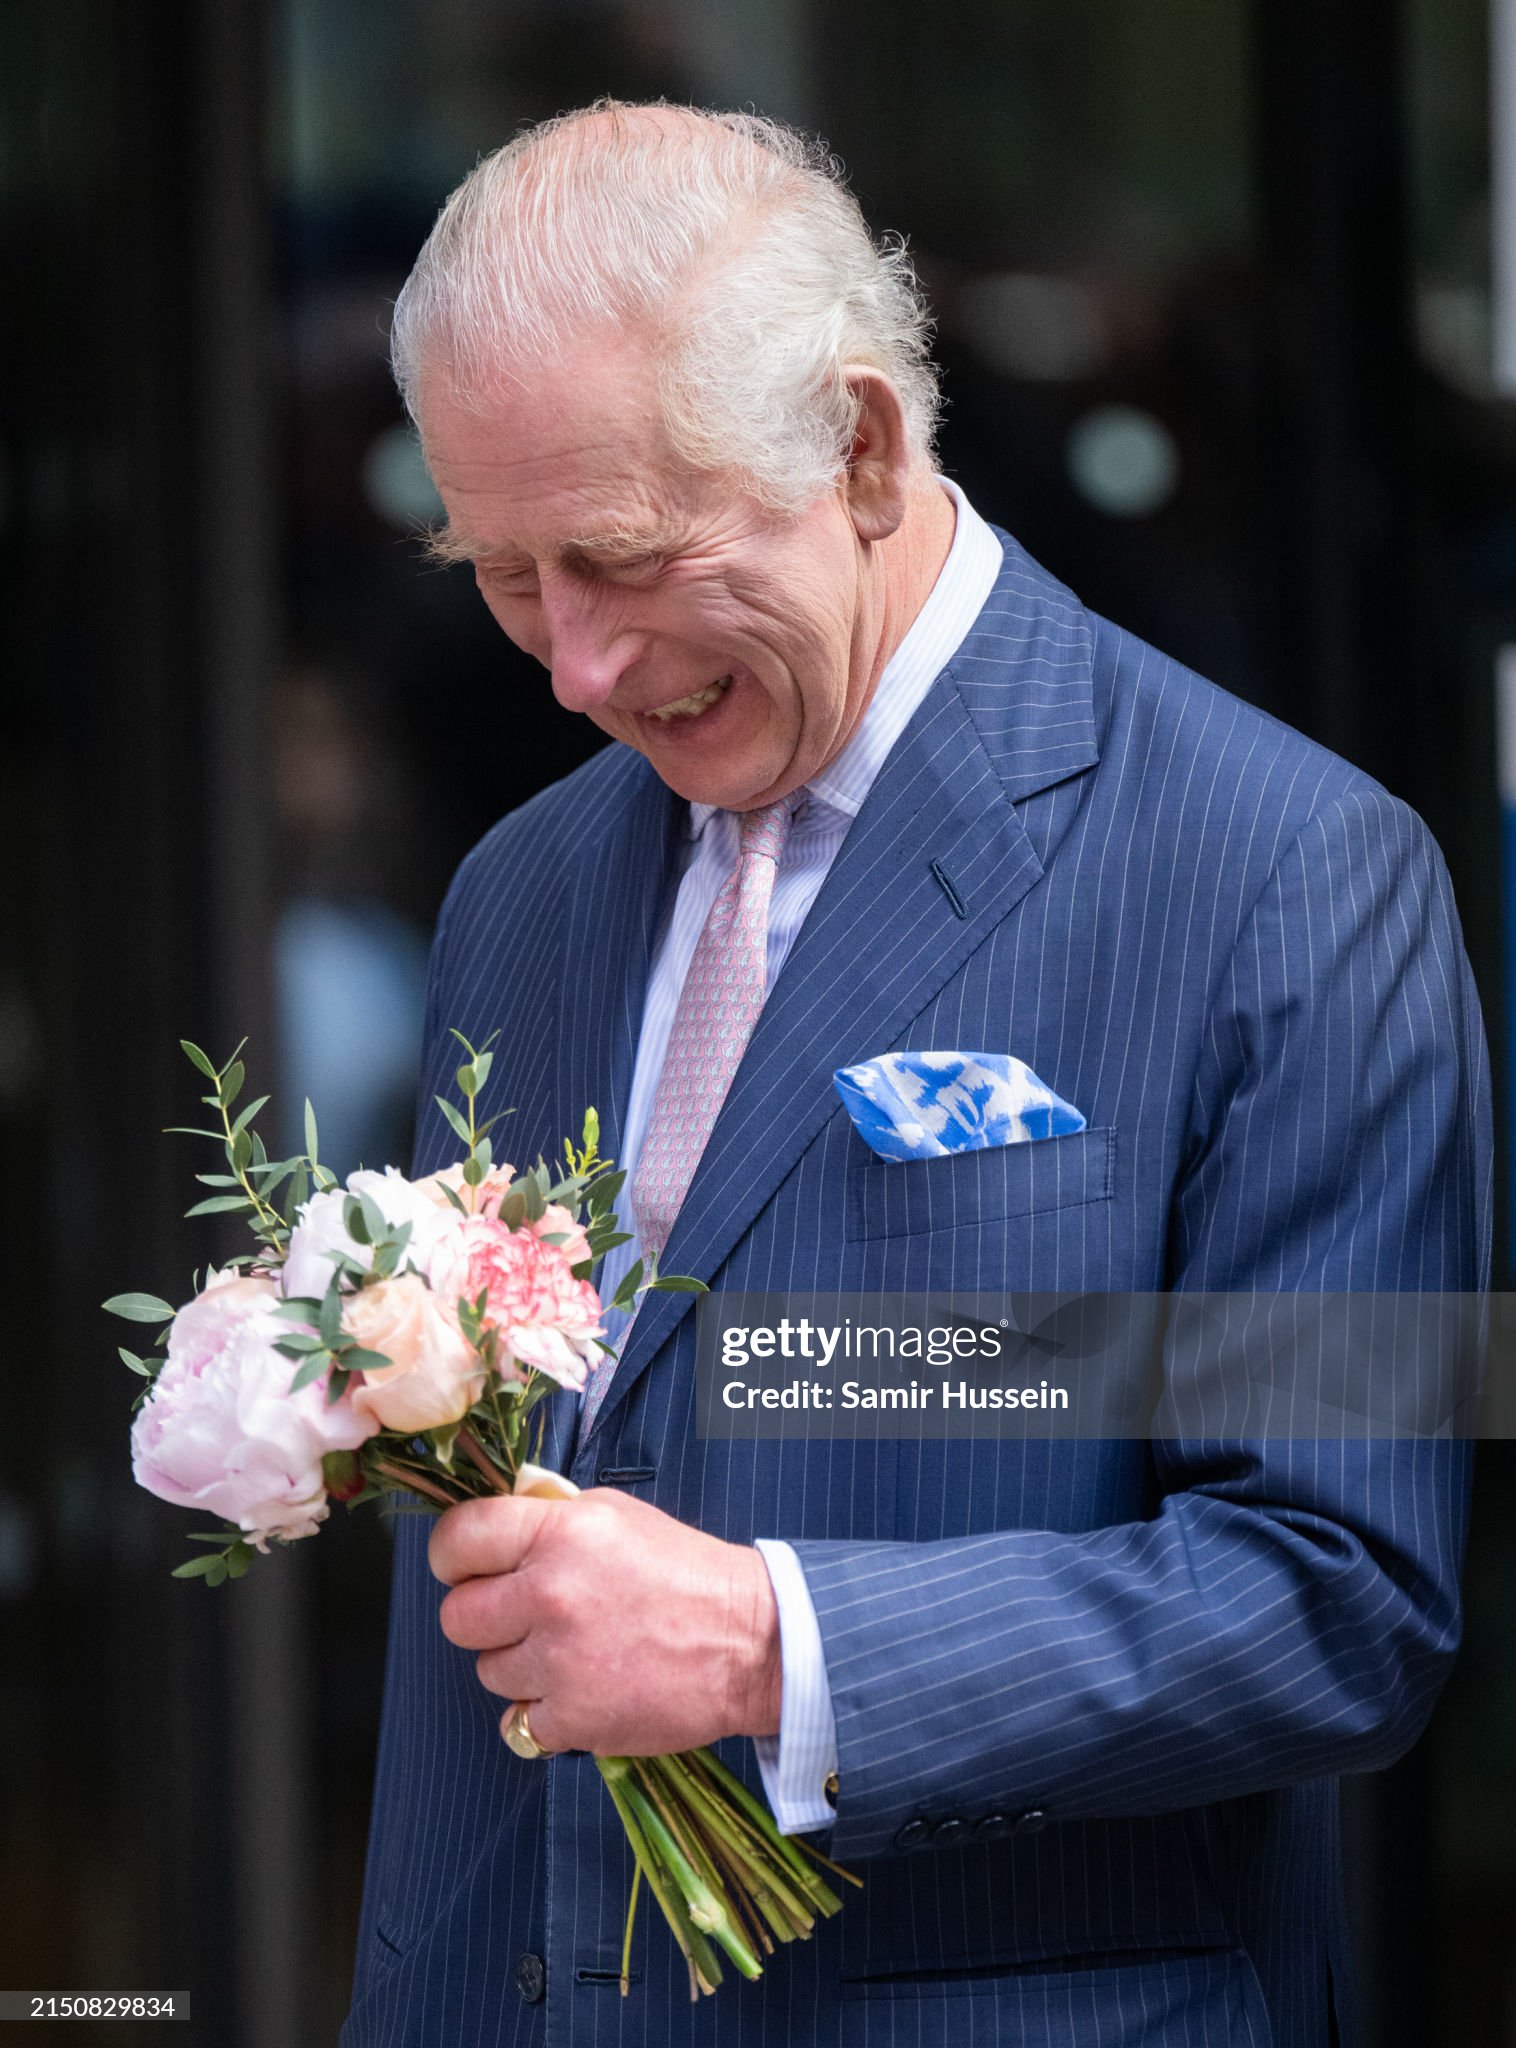 king-charles-iii-and-queen-camilla-visit-university-college-hospital-macmillan-cancer-centre.jpg?s=2048x2048&w=gi&k=20&c=W51308qT_WAjydzYZb61aK4n4Ef06H_yUD1jhl9cW4w=